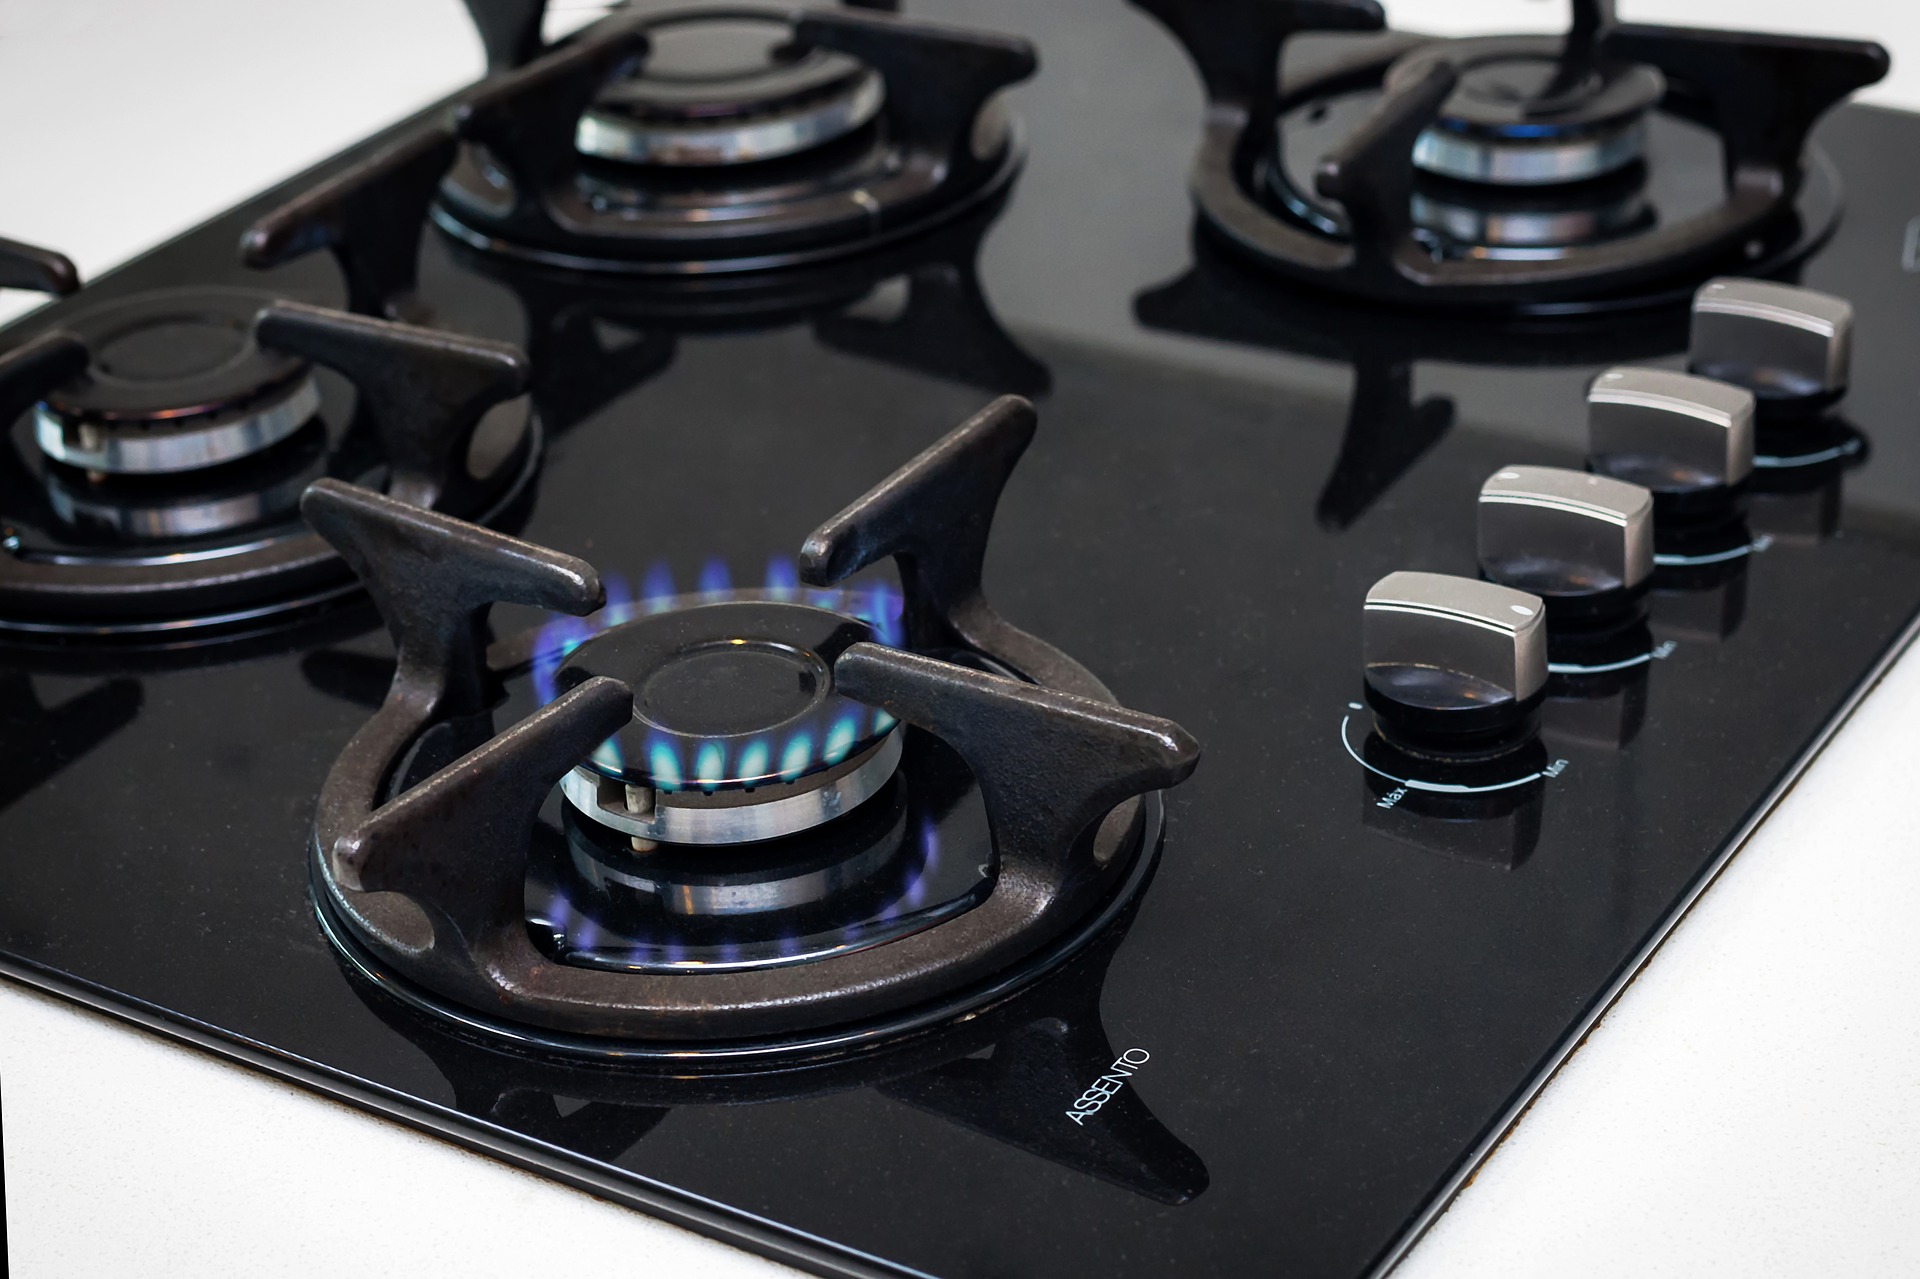 A gas stove with a burner on.